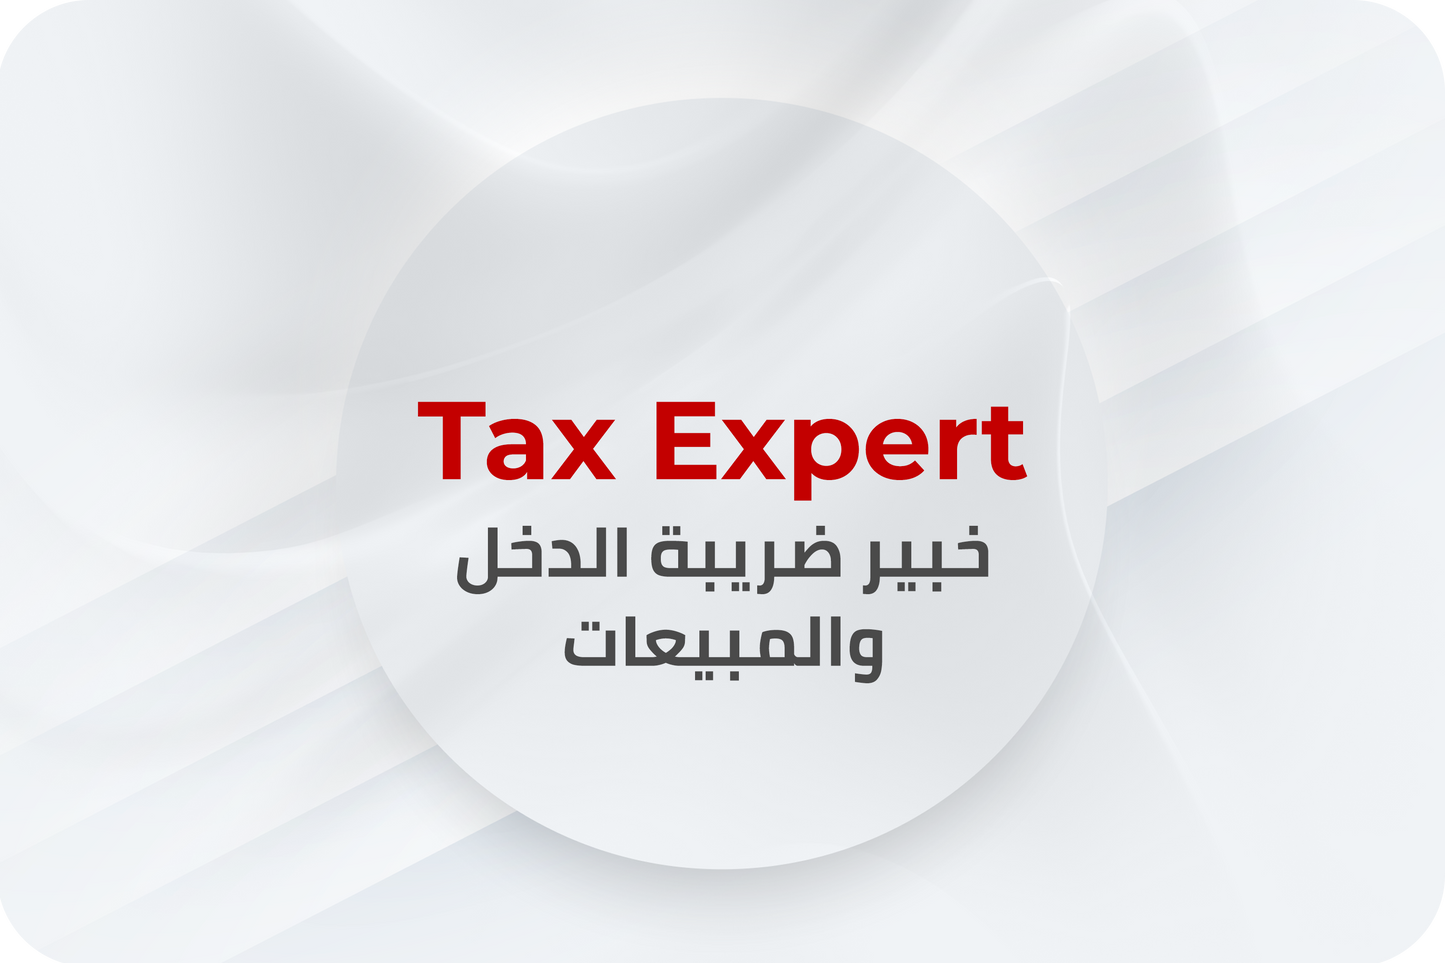 Income and sales tax expert course